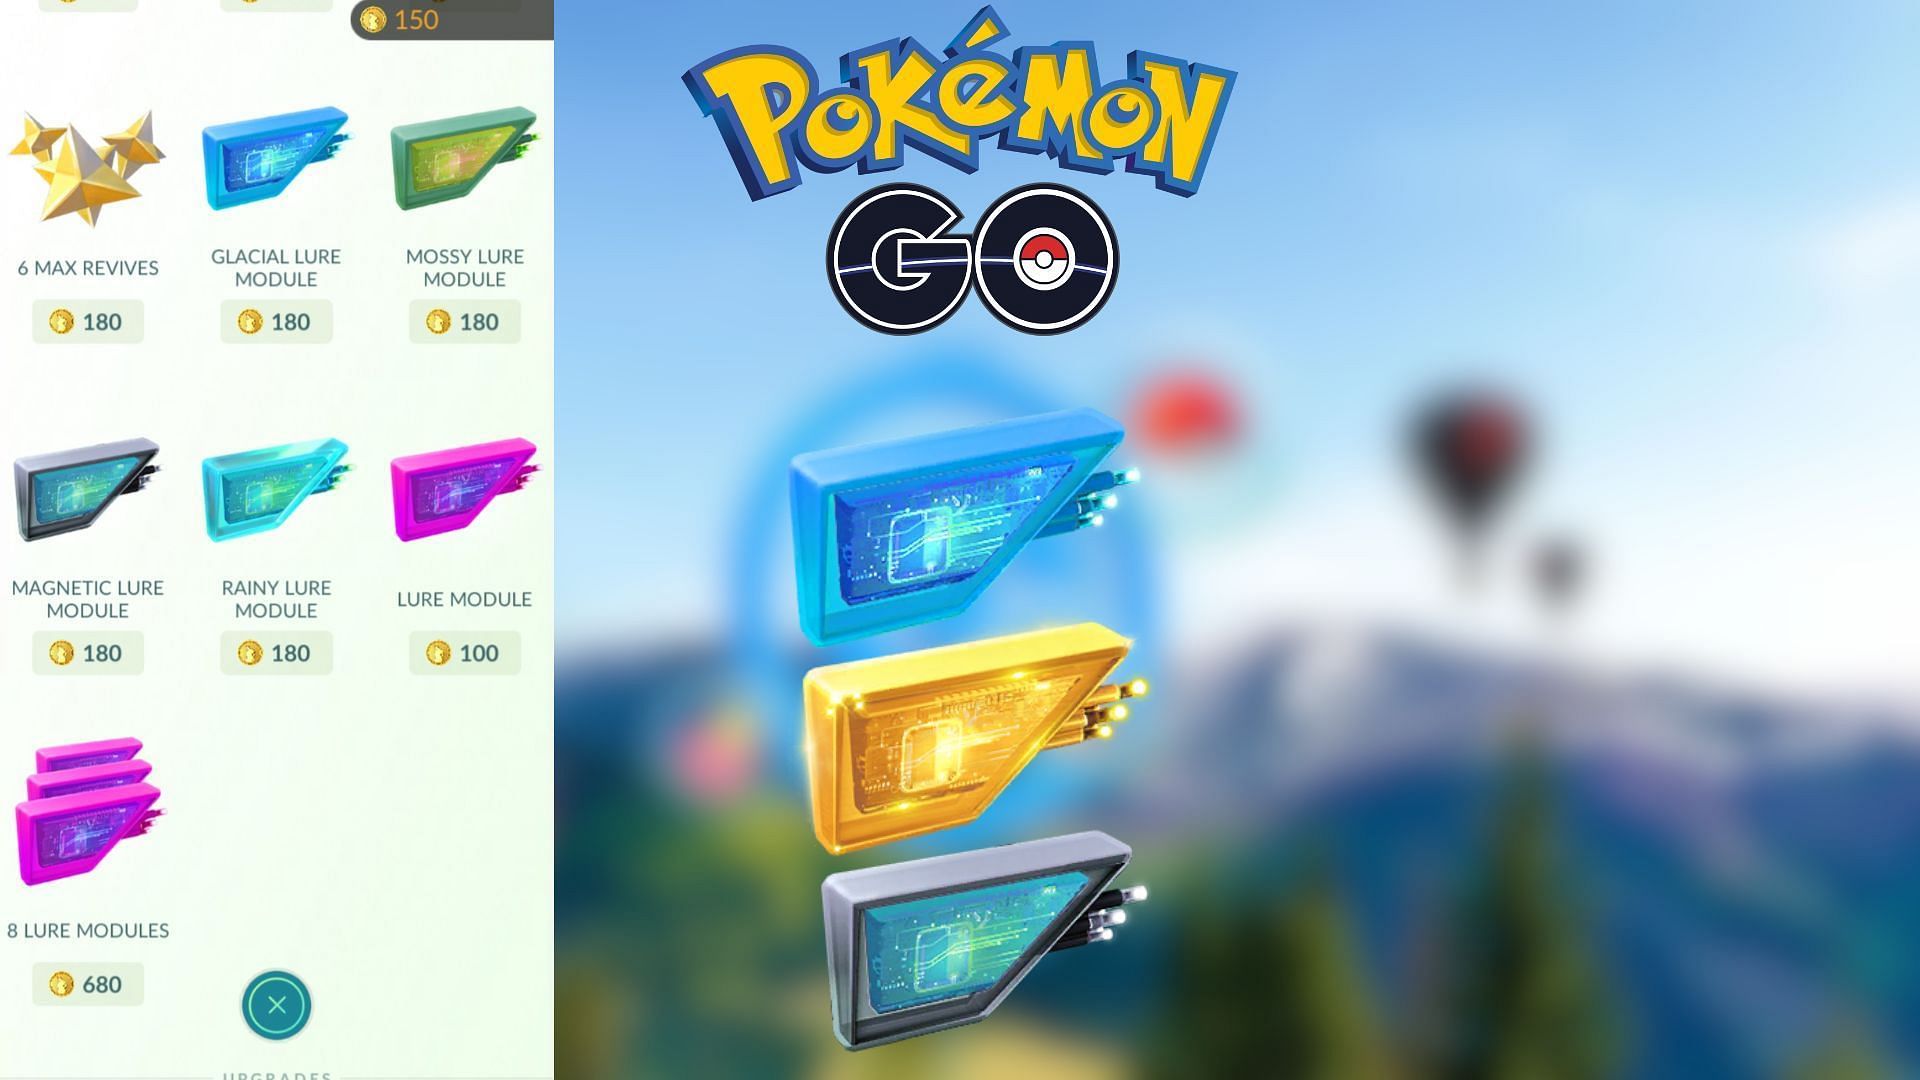 Pokemon GO: How to Use the New Lure Modules